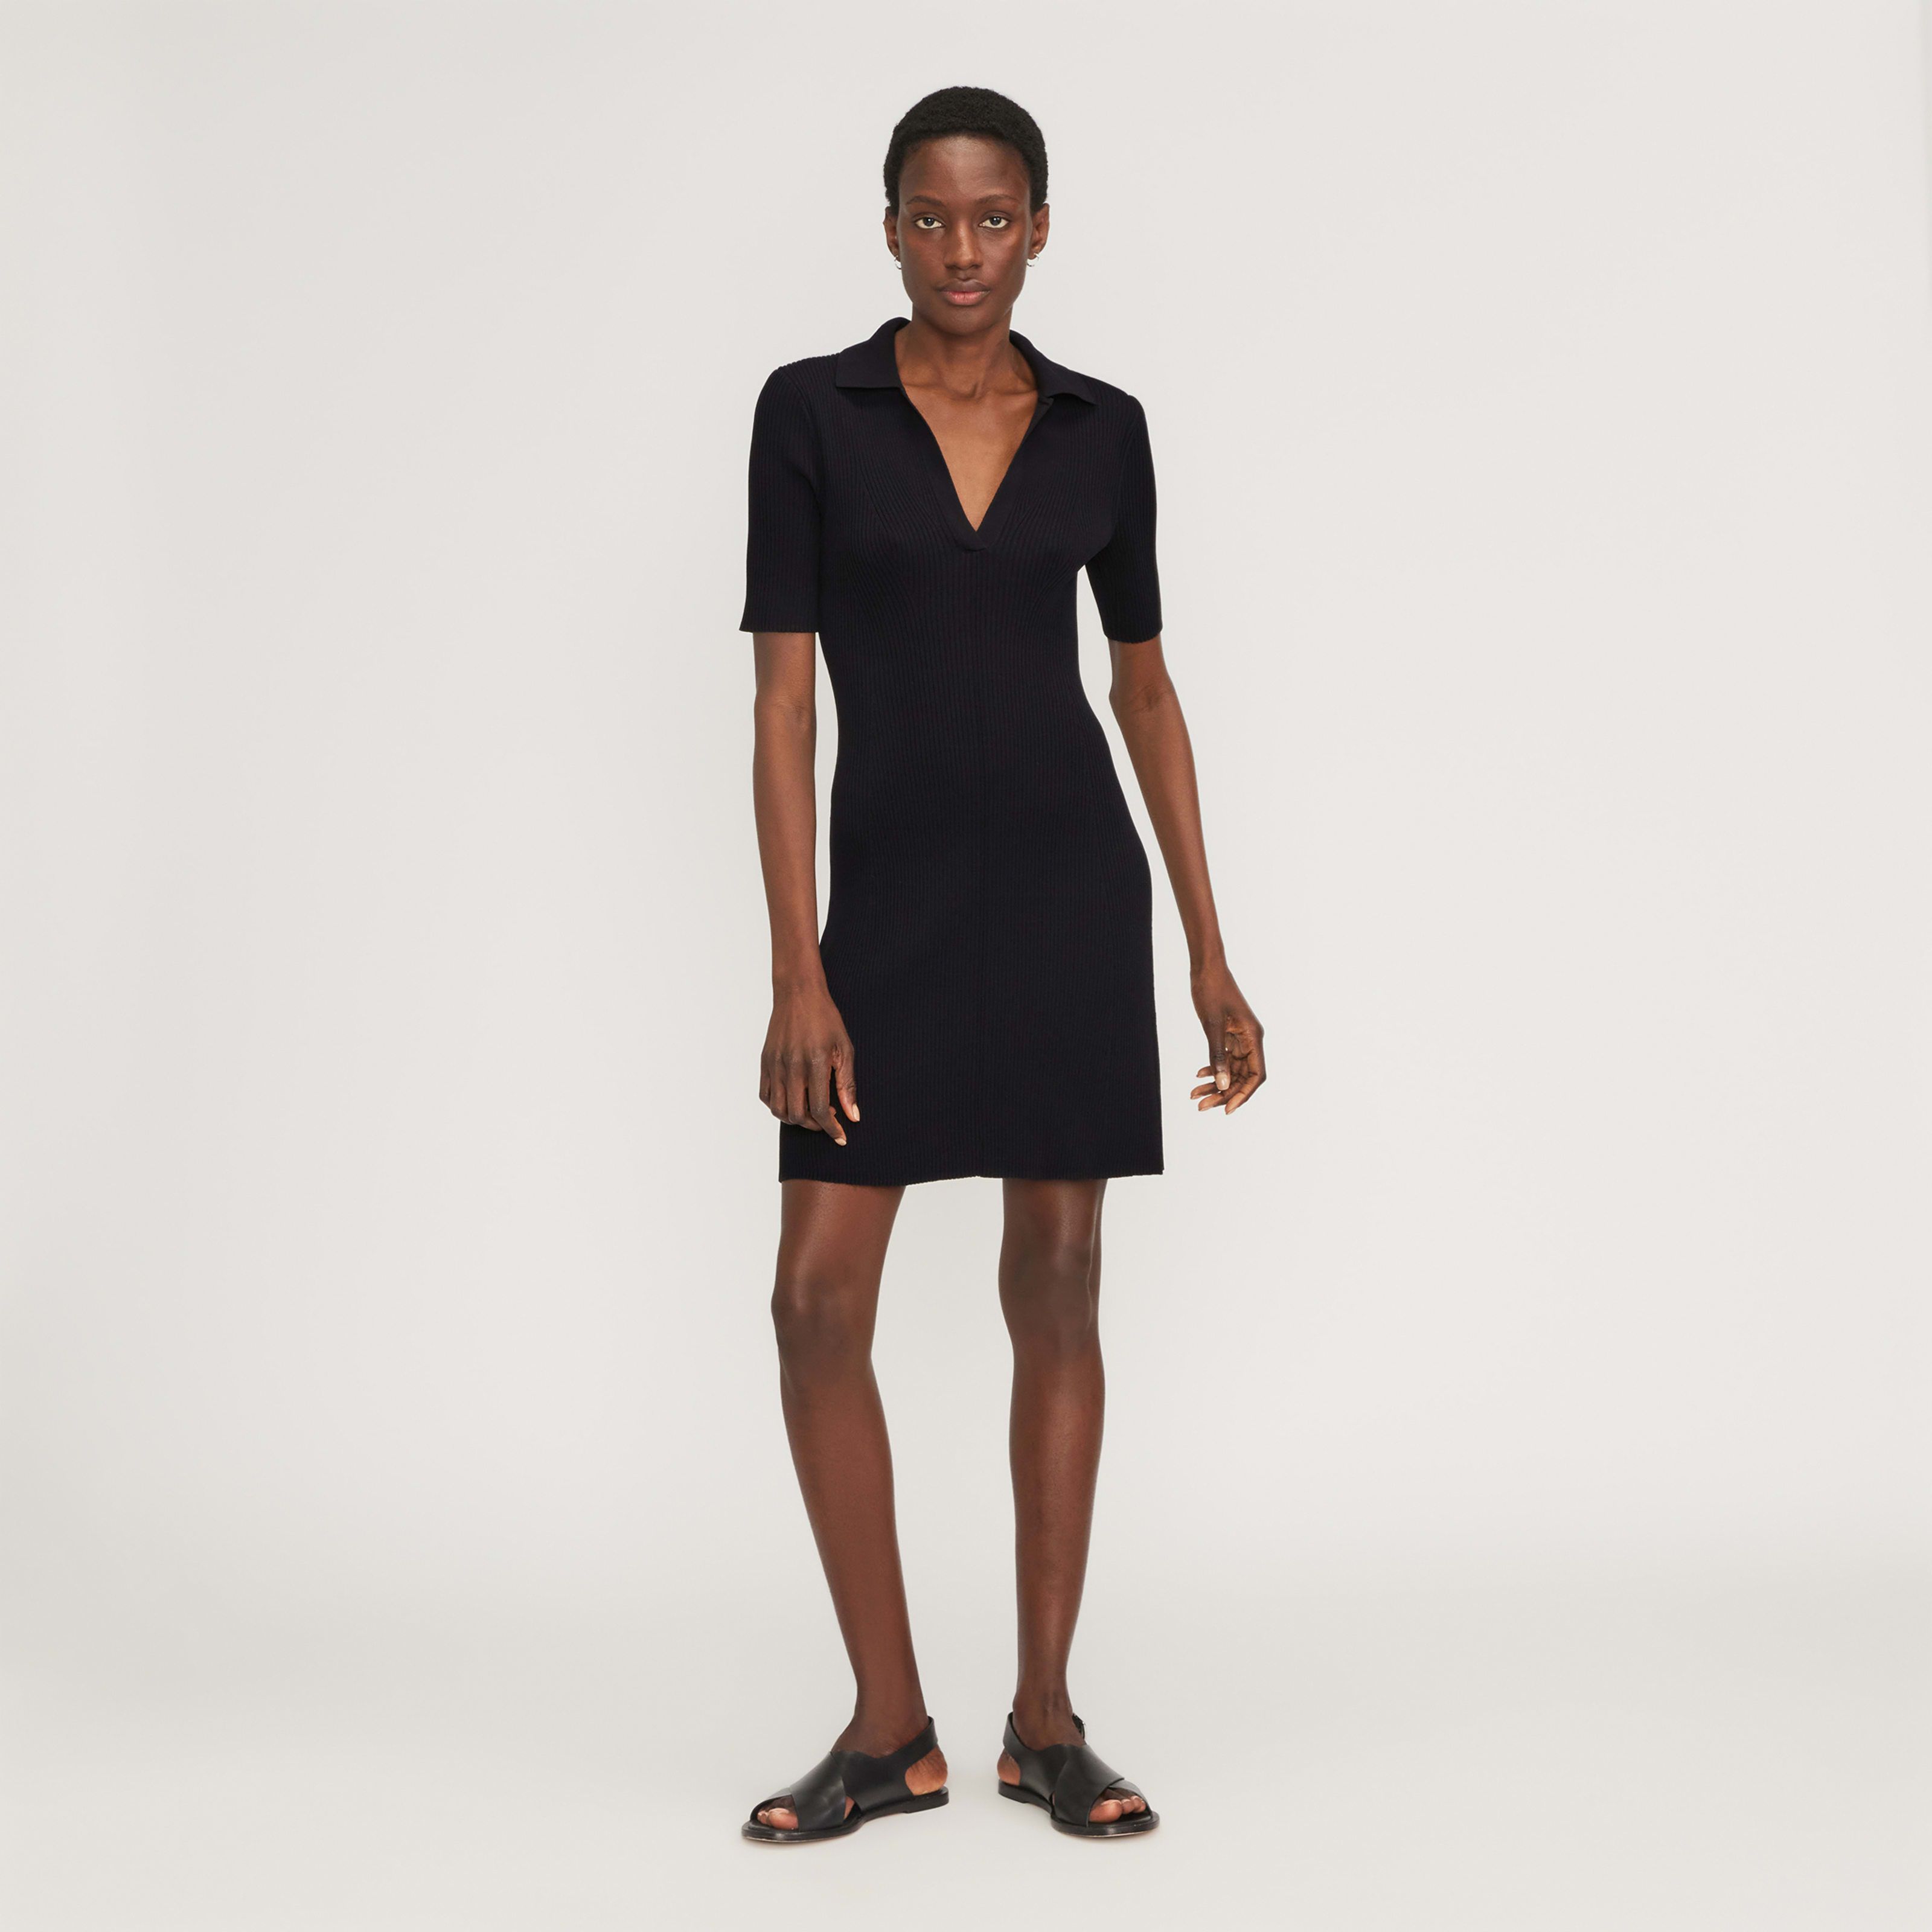 Women's Ribbed Short-Sleeve Polo Dress by Everlane in Black, Size XL | Everlane